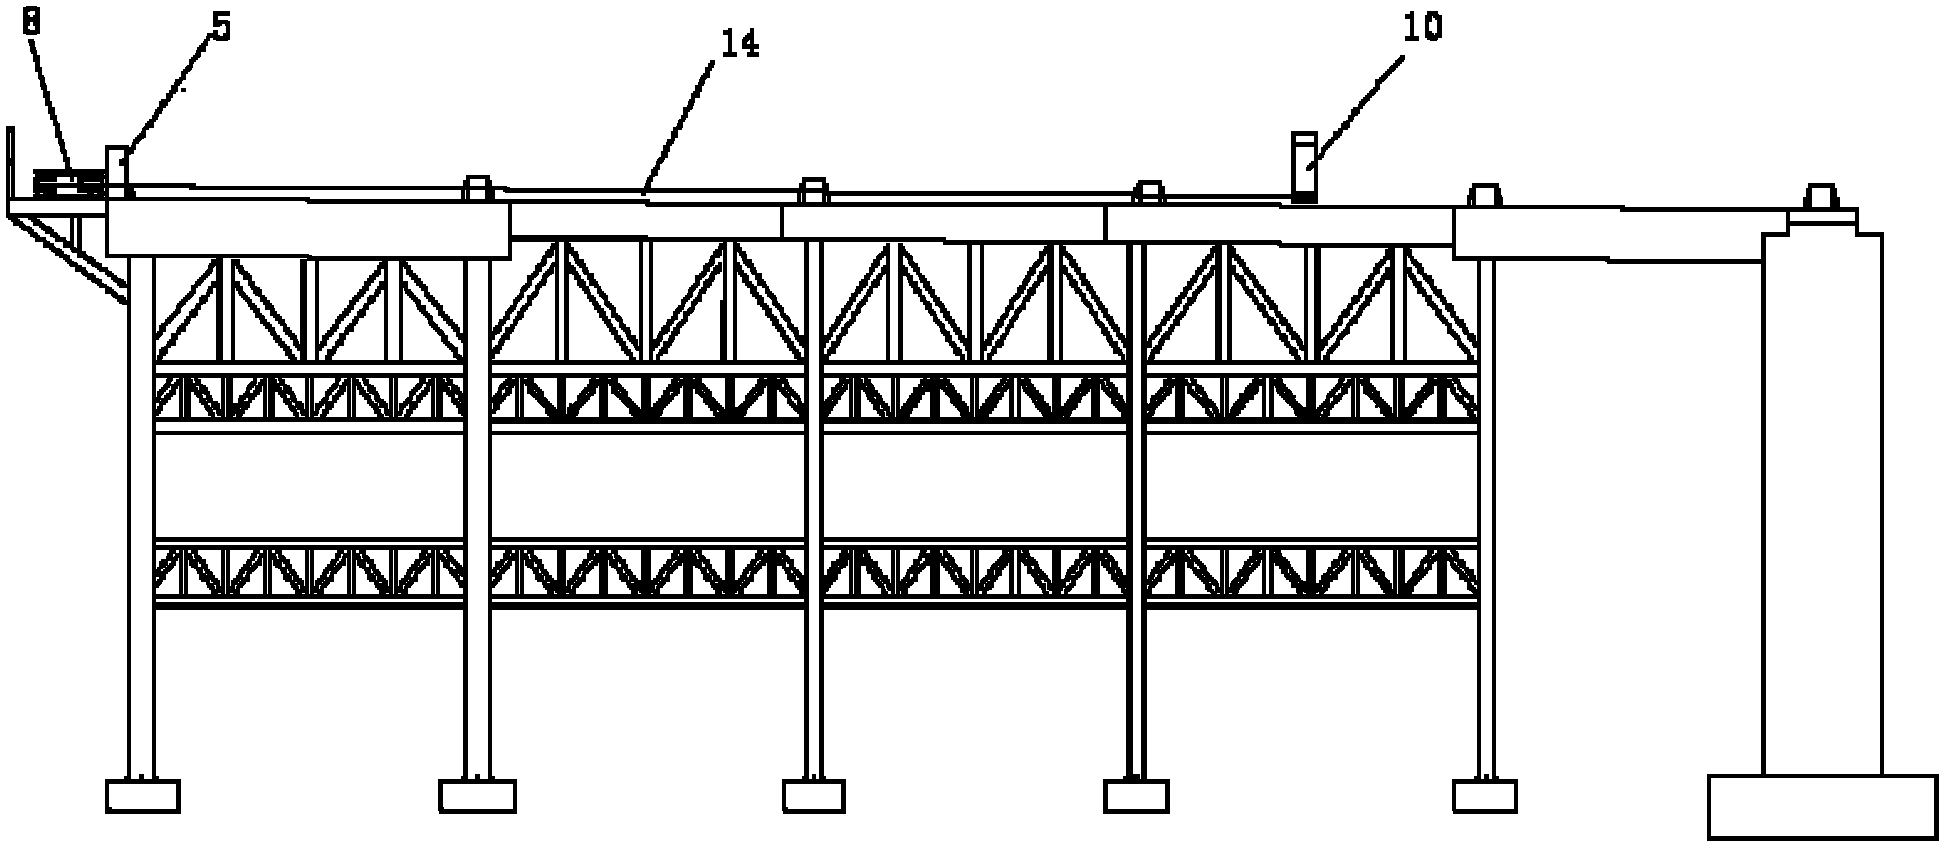 Large-span continuous steel truss girder arch pushing device